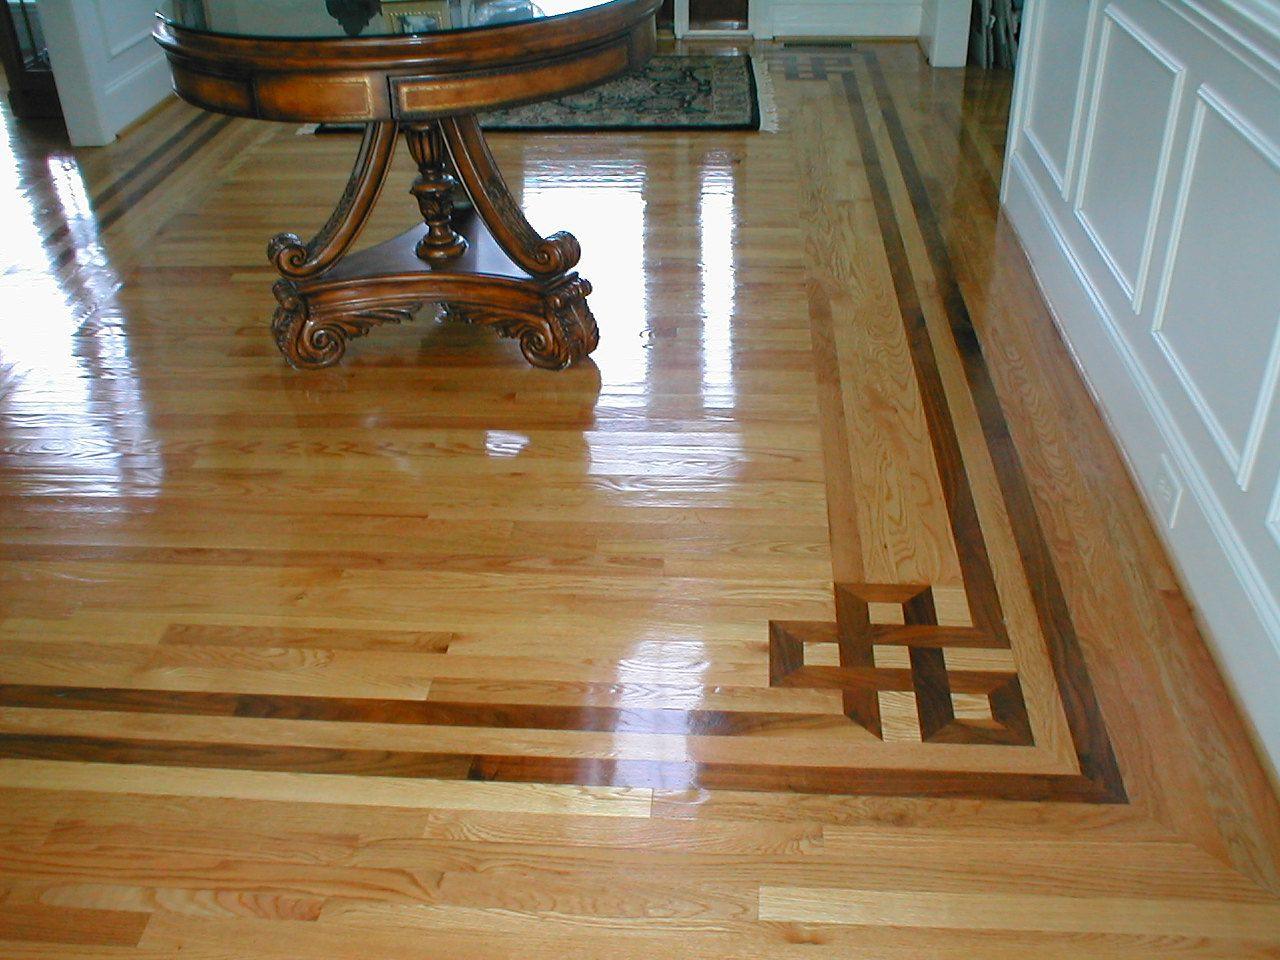 hardwood floor refinishing san jose of i love the illusion of depth created by this border you can tell throughout i love the illusion of depth created by this border you can tell the installers took care to contrast shades of the border material to keep it from all